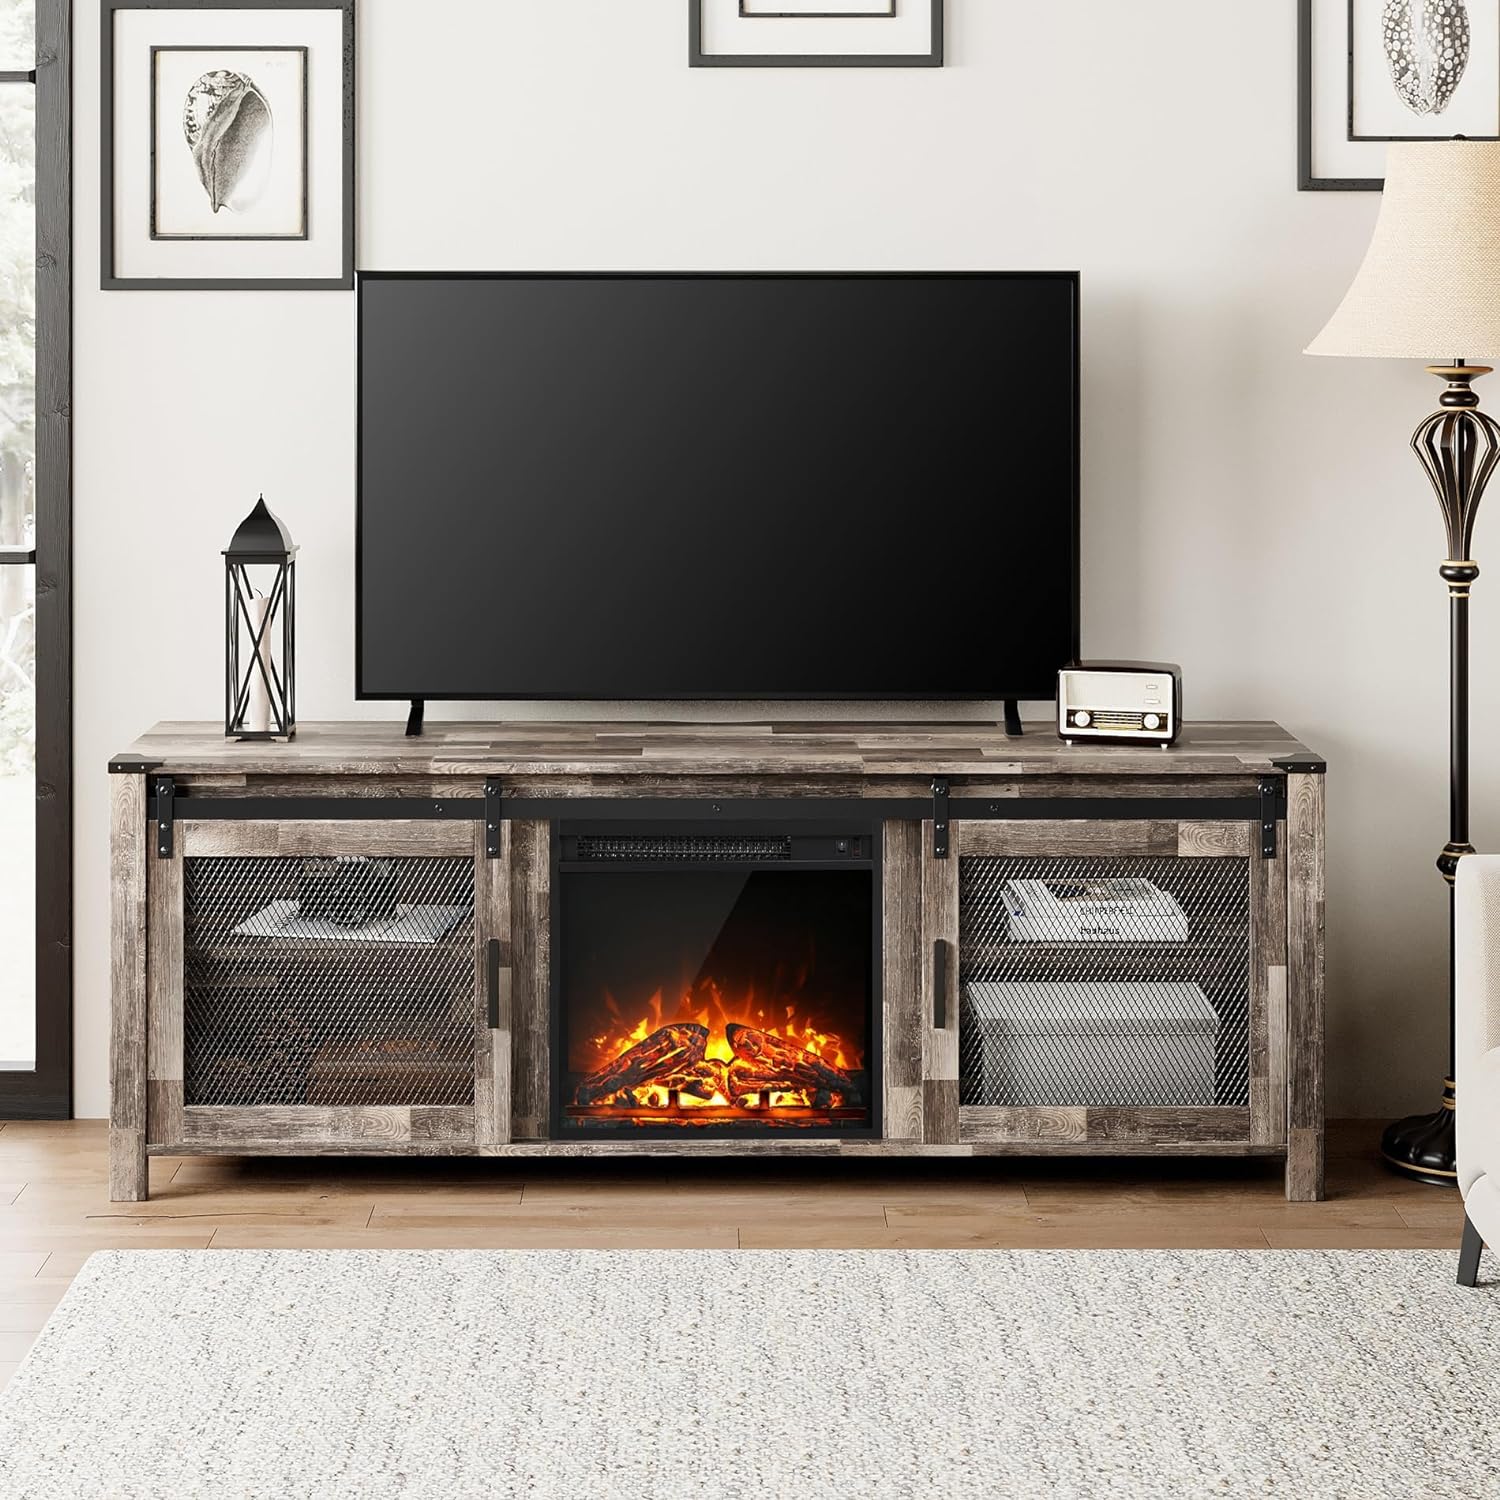 WAMPAT Fireplace TV Stand for 65+ Inch TV, Farmhouse Highboy Entertainment Center with 23" Electric Fireplace